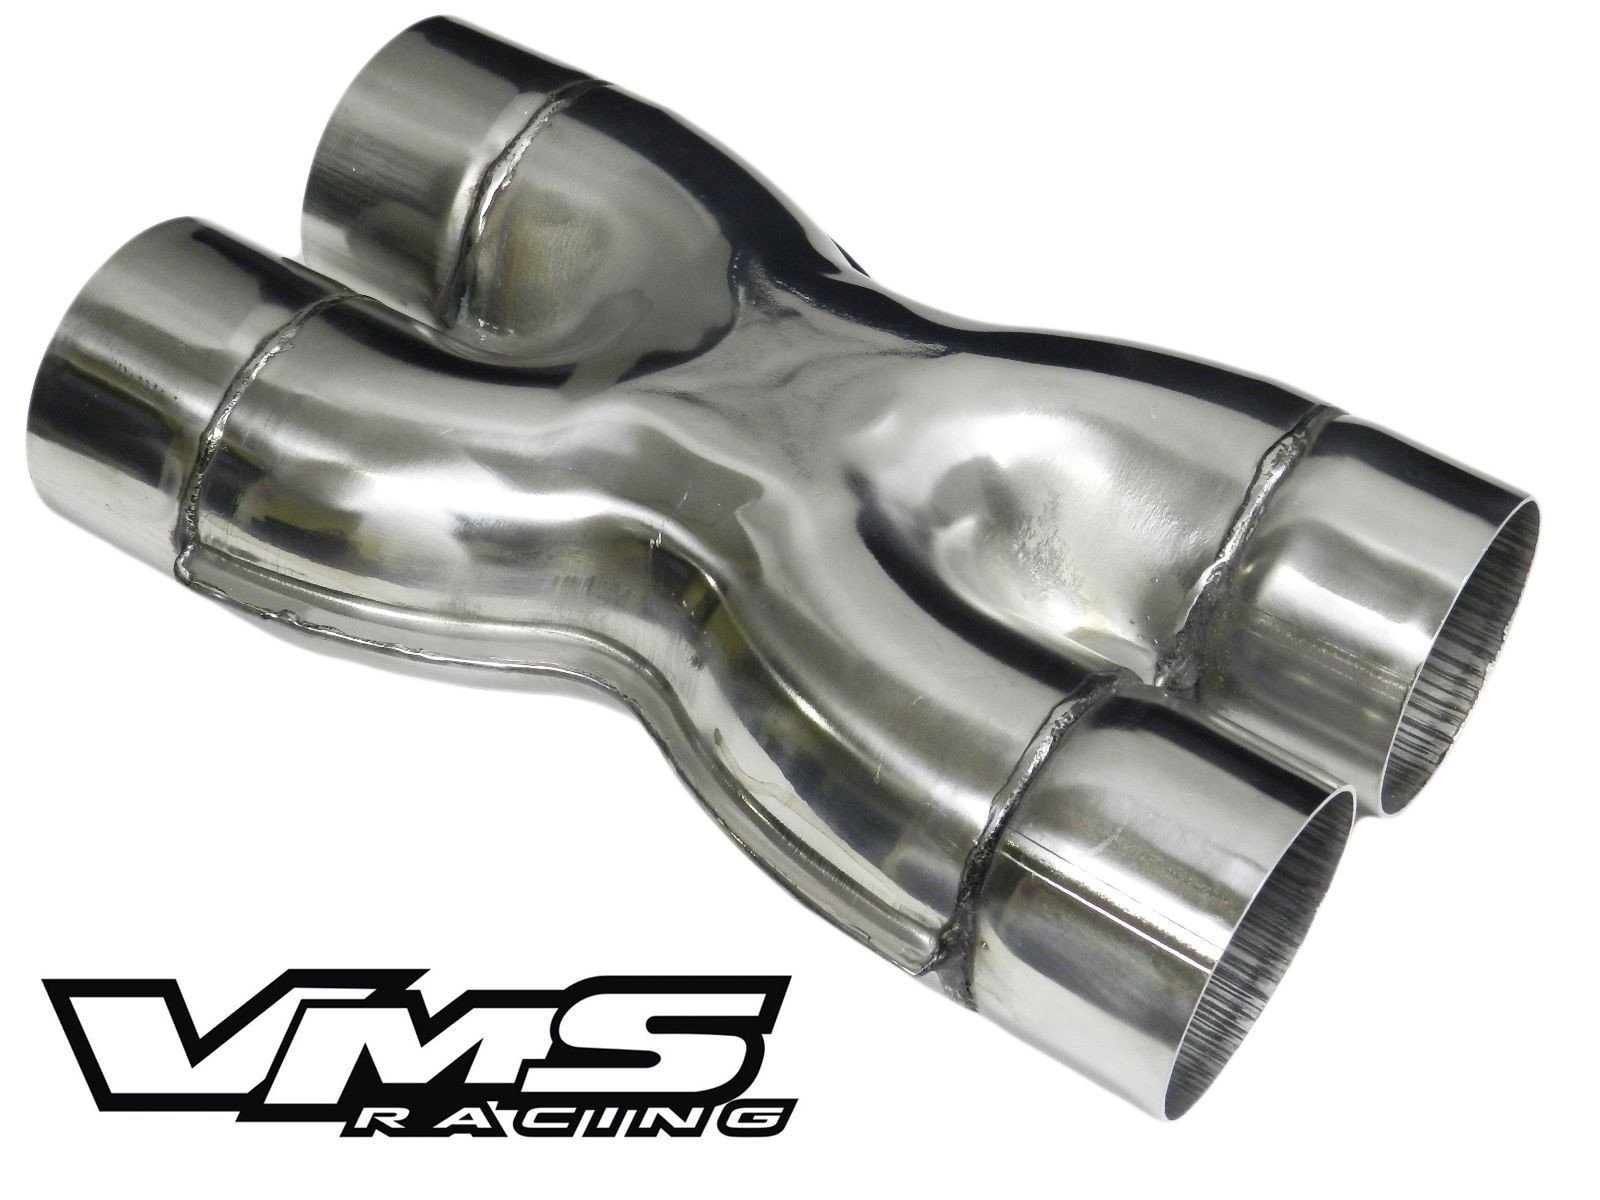 VMS Racing Stainless Steel 2.5" inch Crossover X-Pipe, Chrome, Universal Fit